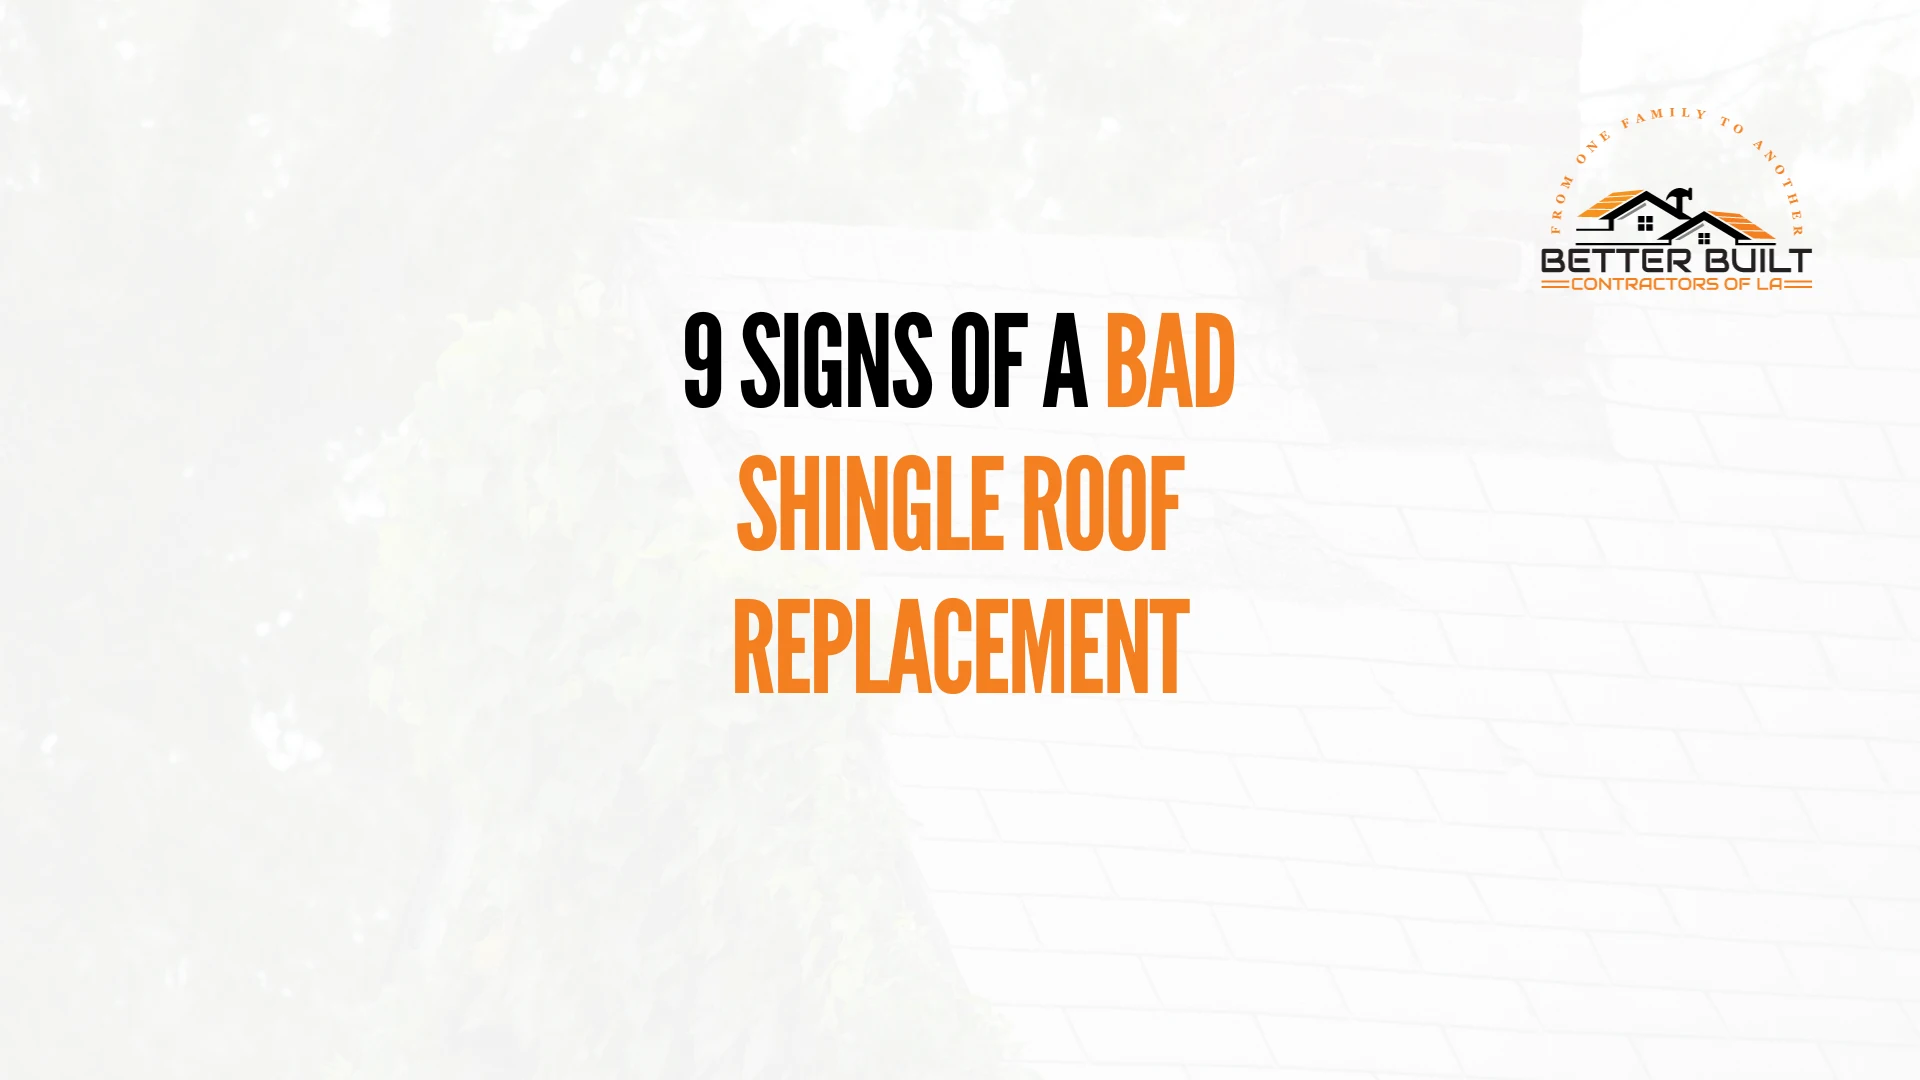 9 Signs of a Bad Shingle Roof Replacement